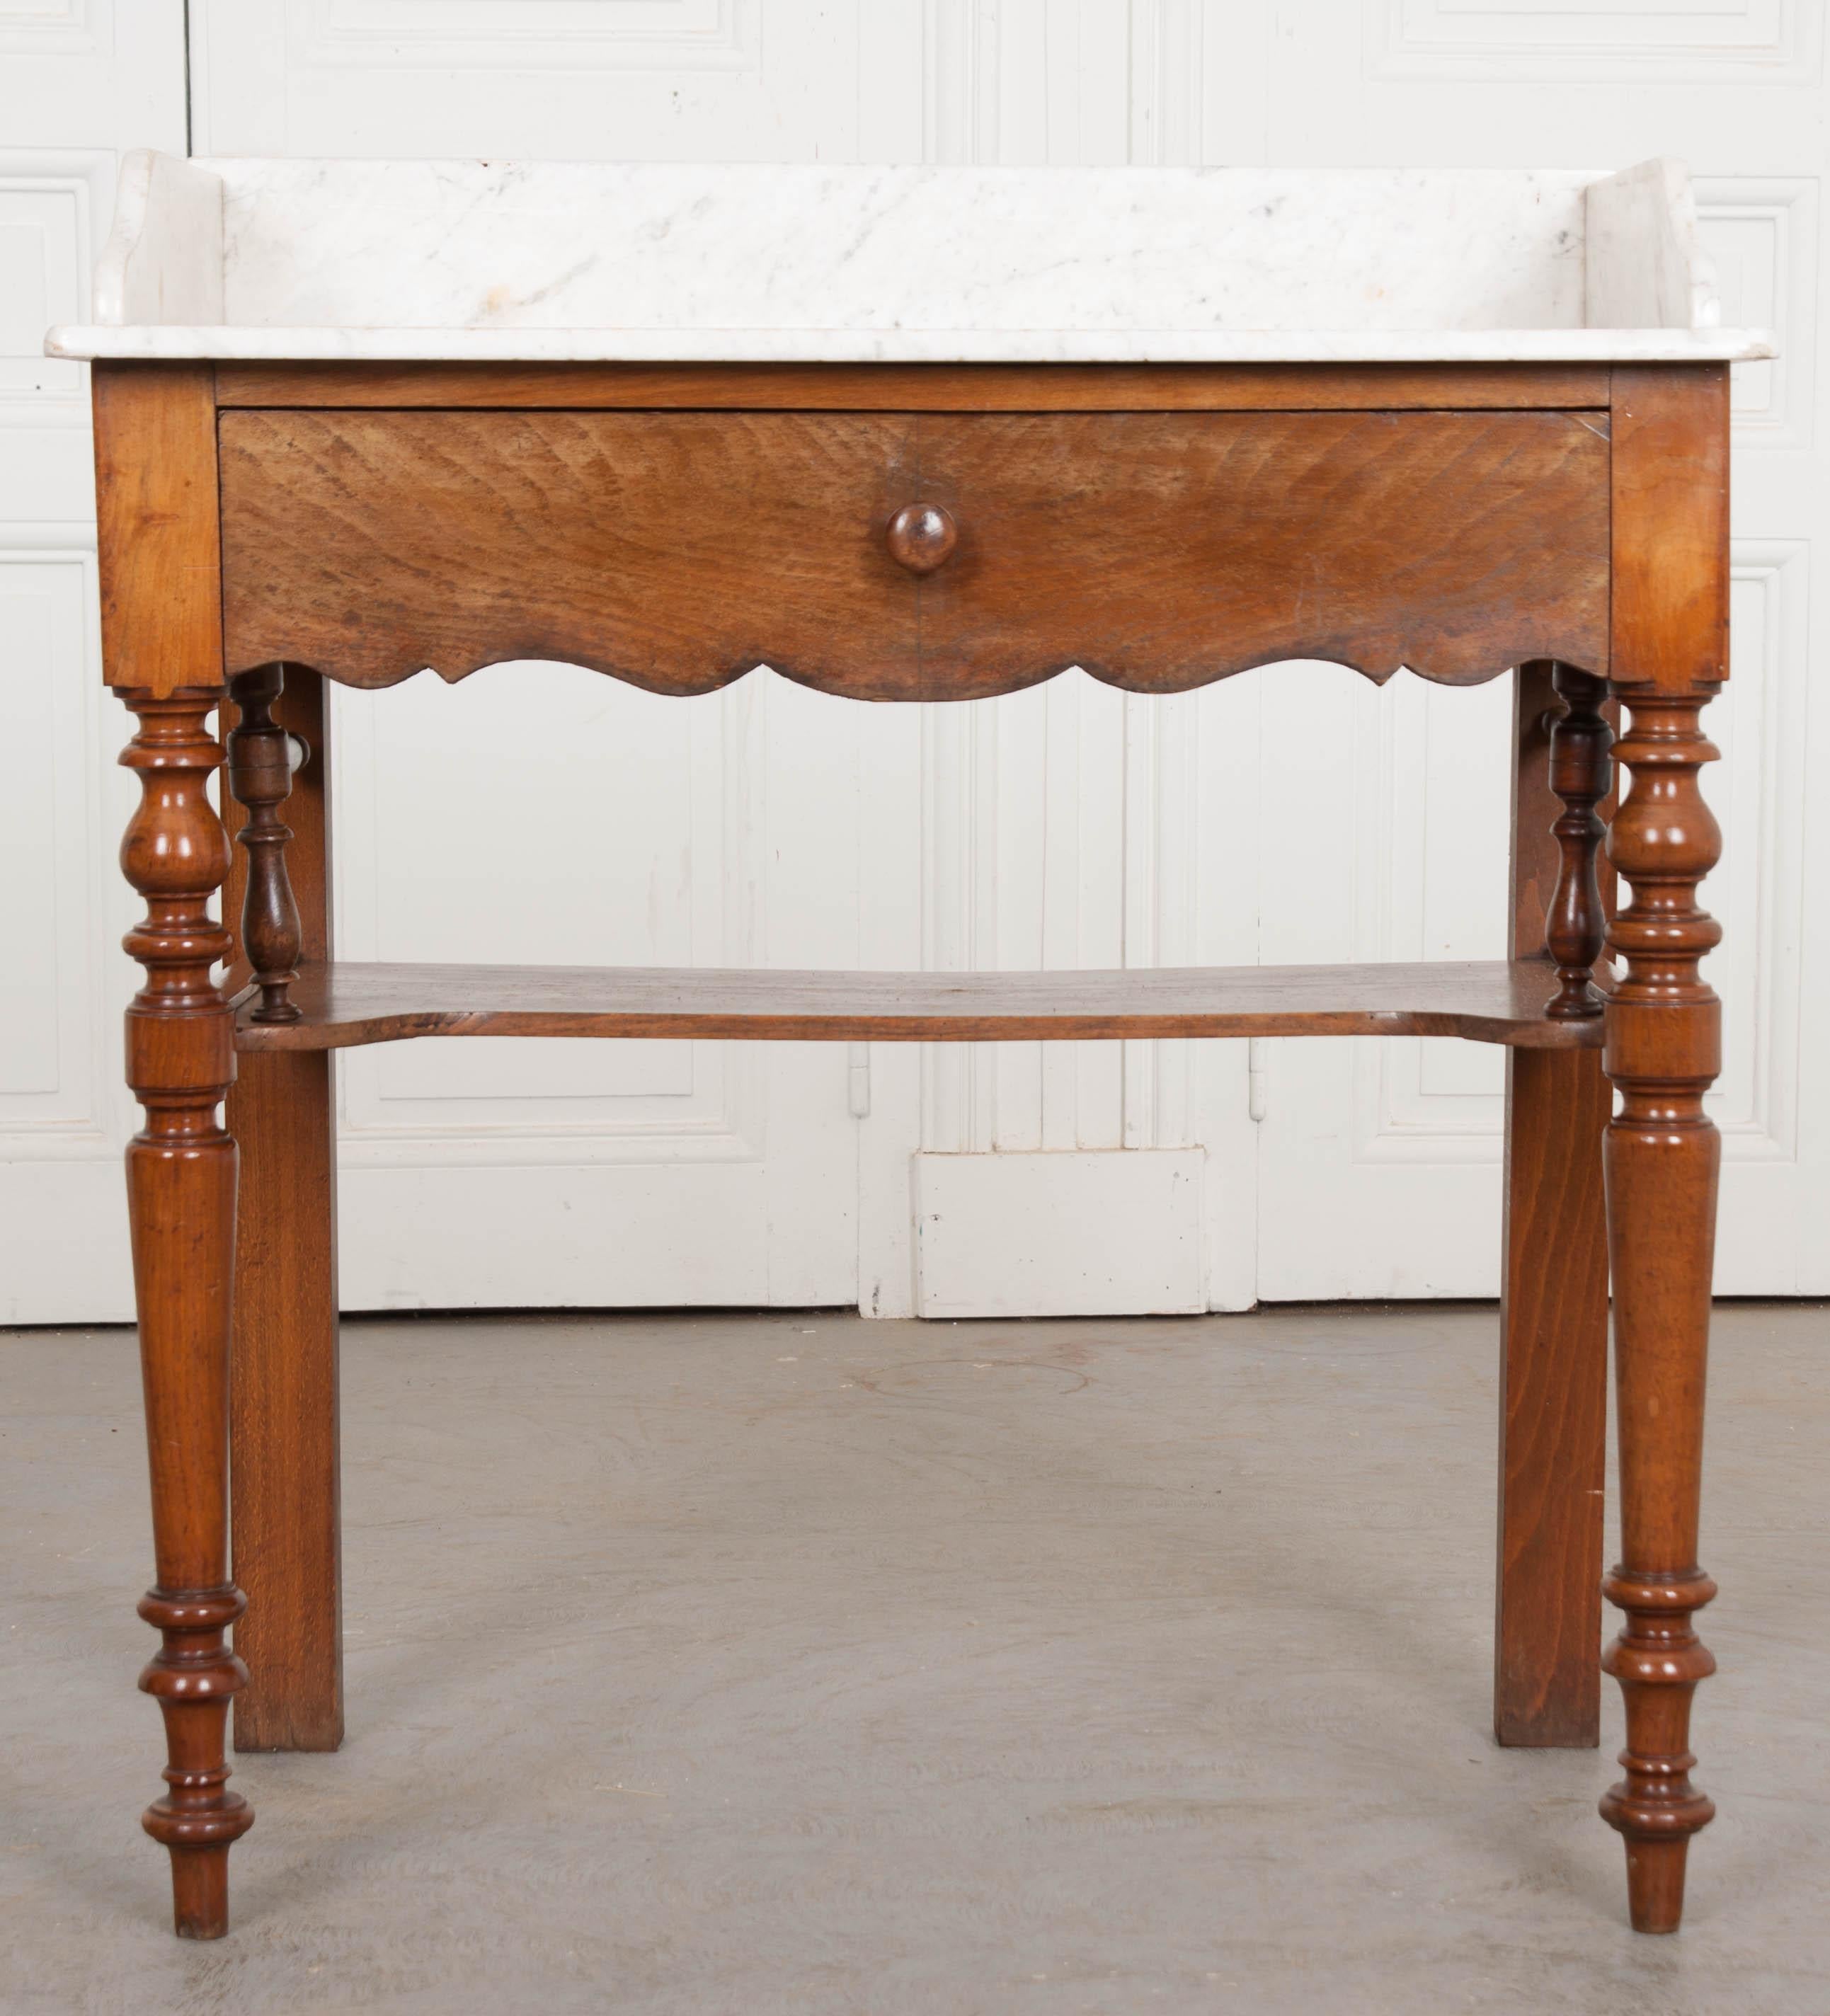 French washstand with marble top, circa late 1800s, is made of walnut and is accompanied with one large drawer and two-fold-out towel holders. It is supported by turned carved legs linked equally with a substantial shelf-stretcher. The marble top is